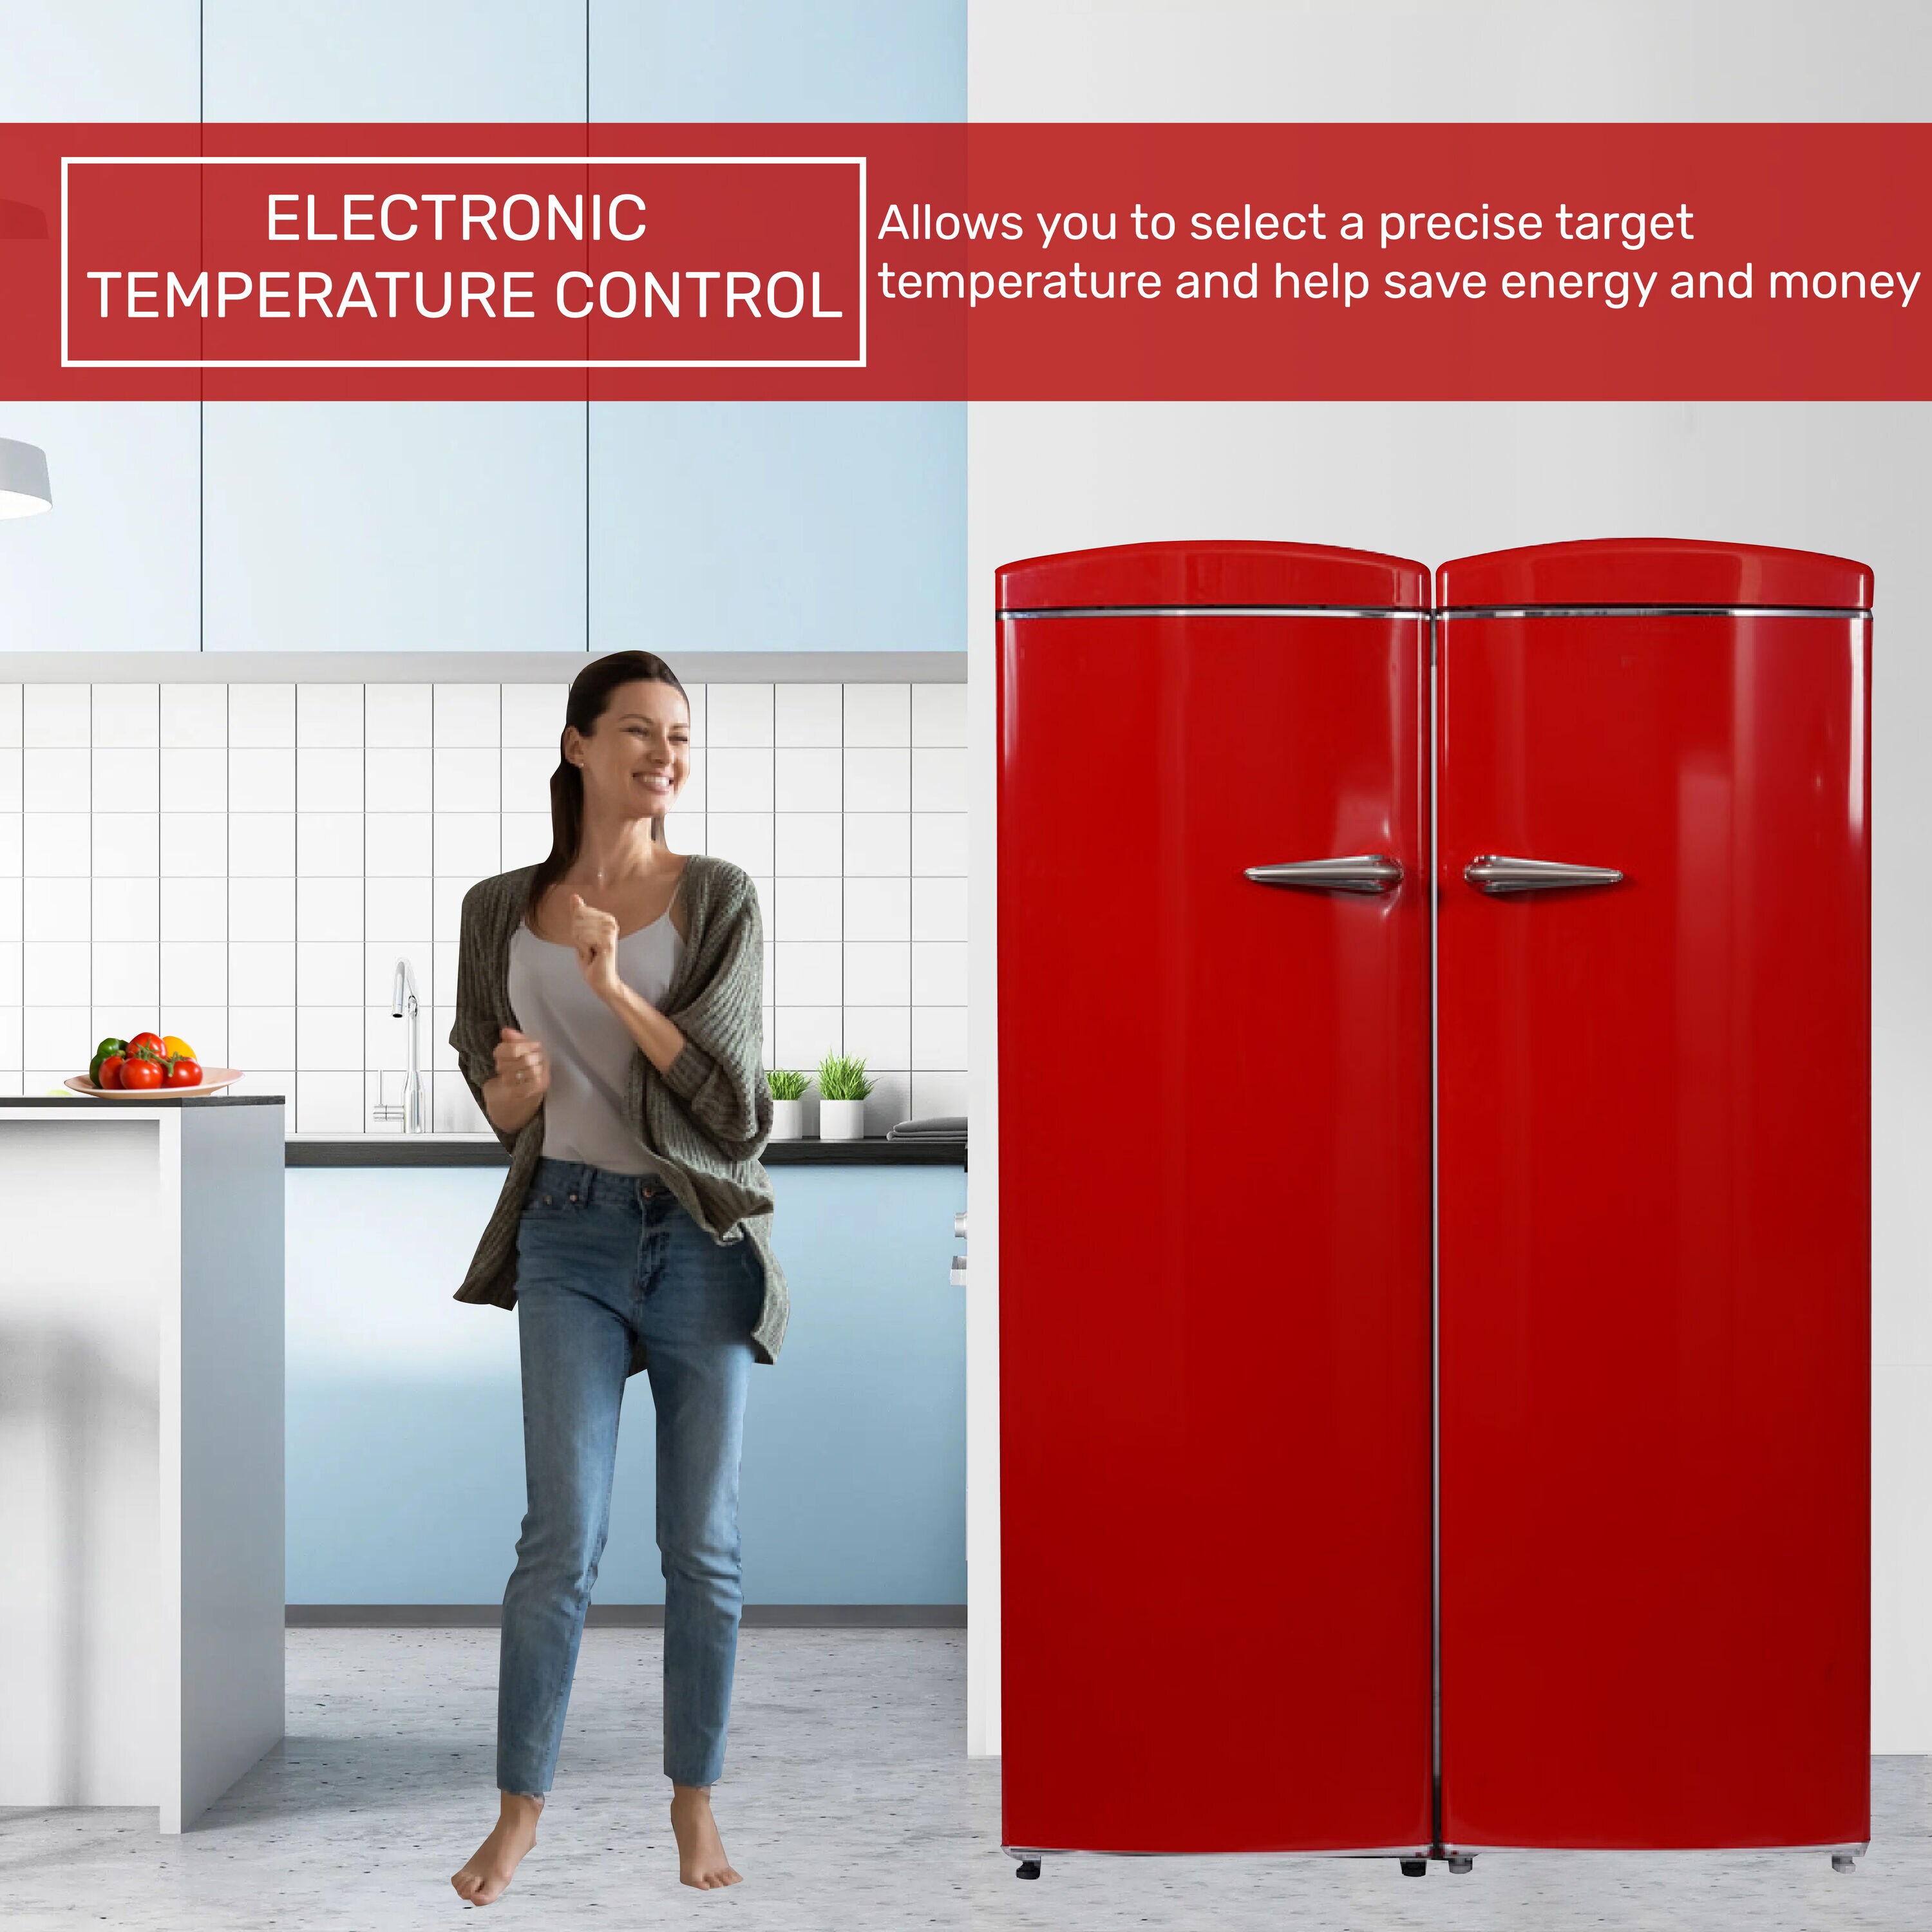 Conserv 4.5 cu.ft. Stainless Compact Refrigerator with Reversible Door-red  – Conserv Appliances